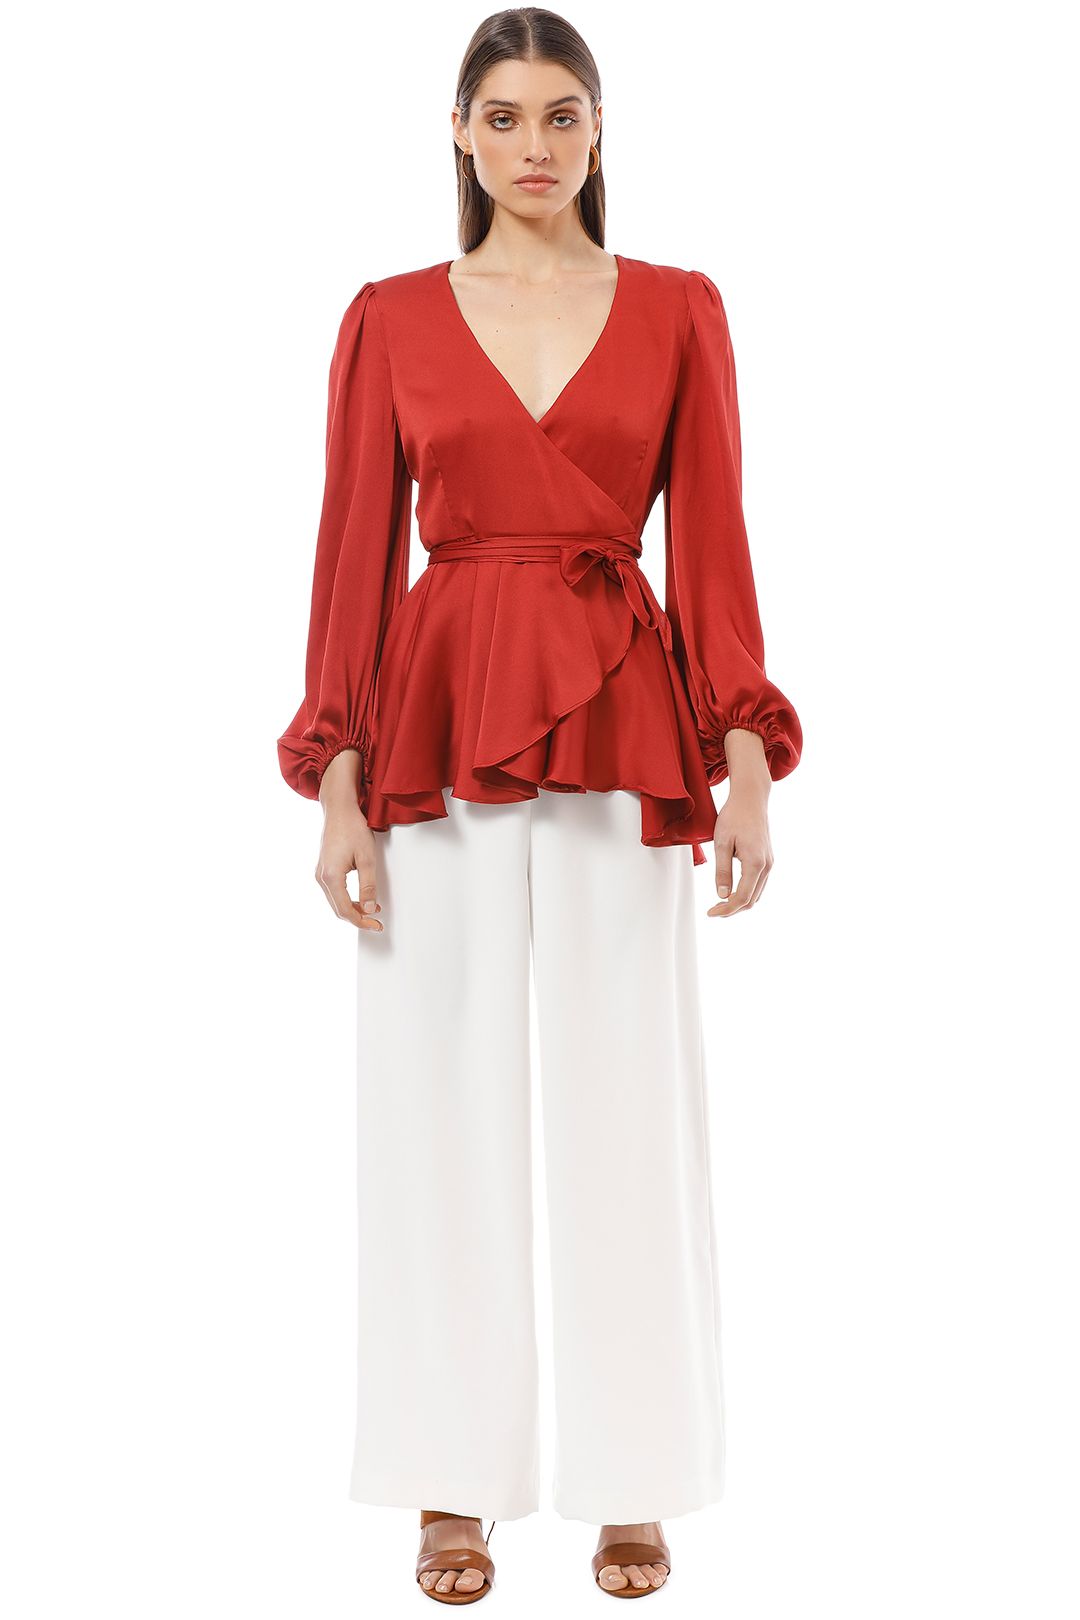 Shona Joy - Anna Puff Sleeve Wrap Blouse - Red - Front